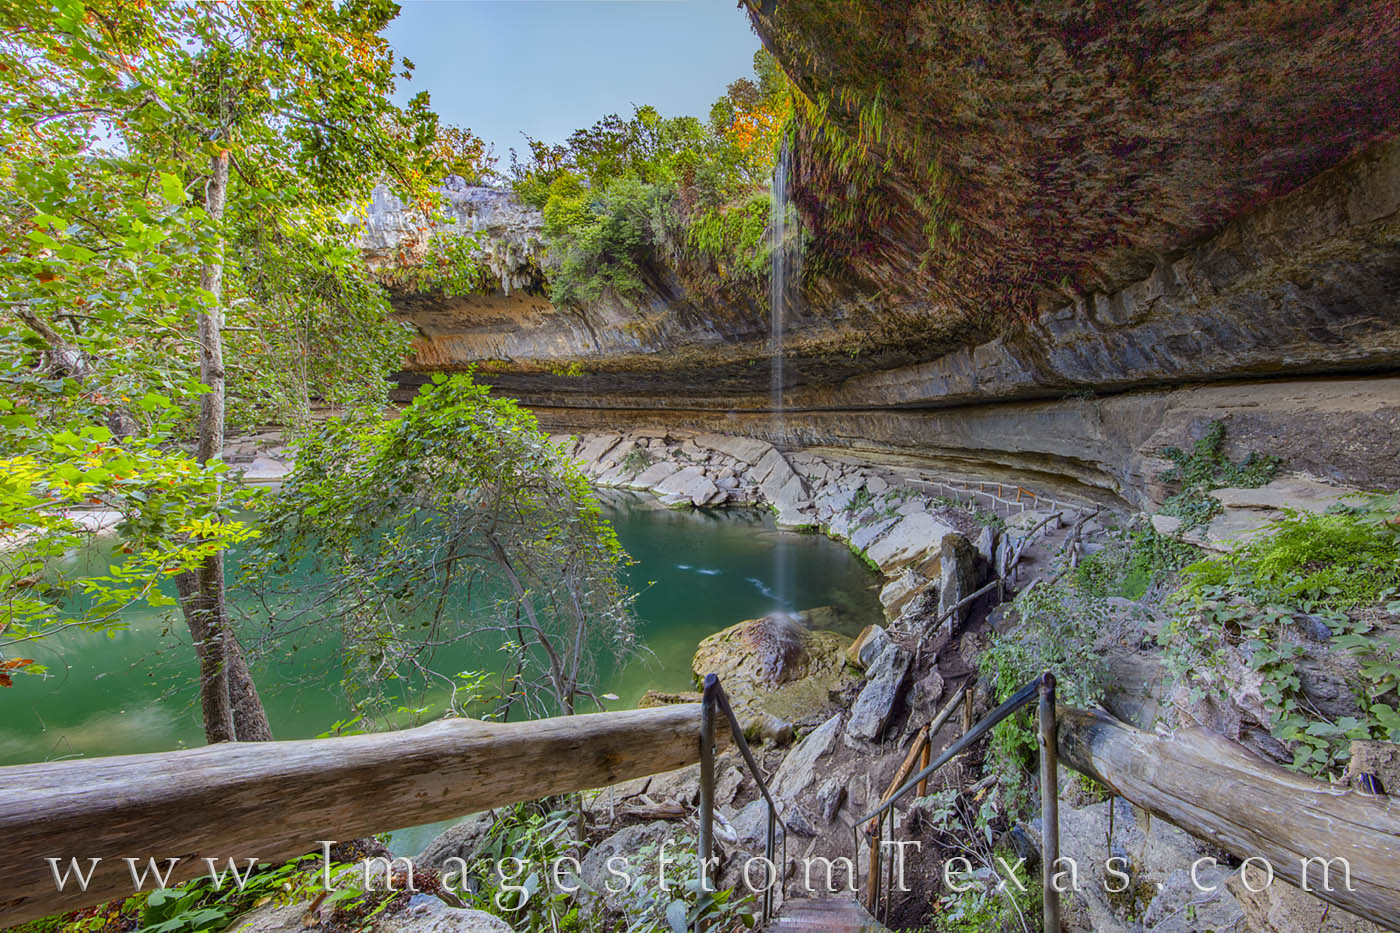 Stairs lead down to the grotto of Hamilton Pool, a grotto just west of Austin, Texas.